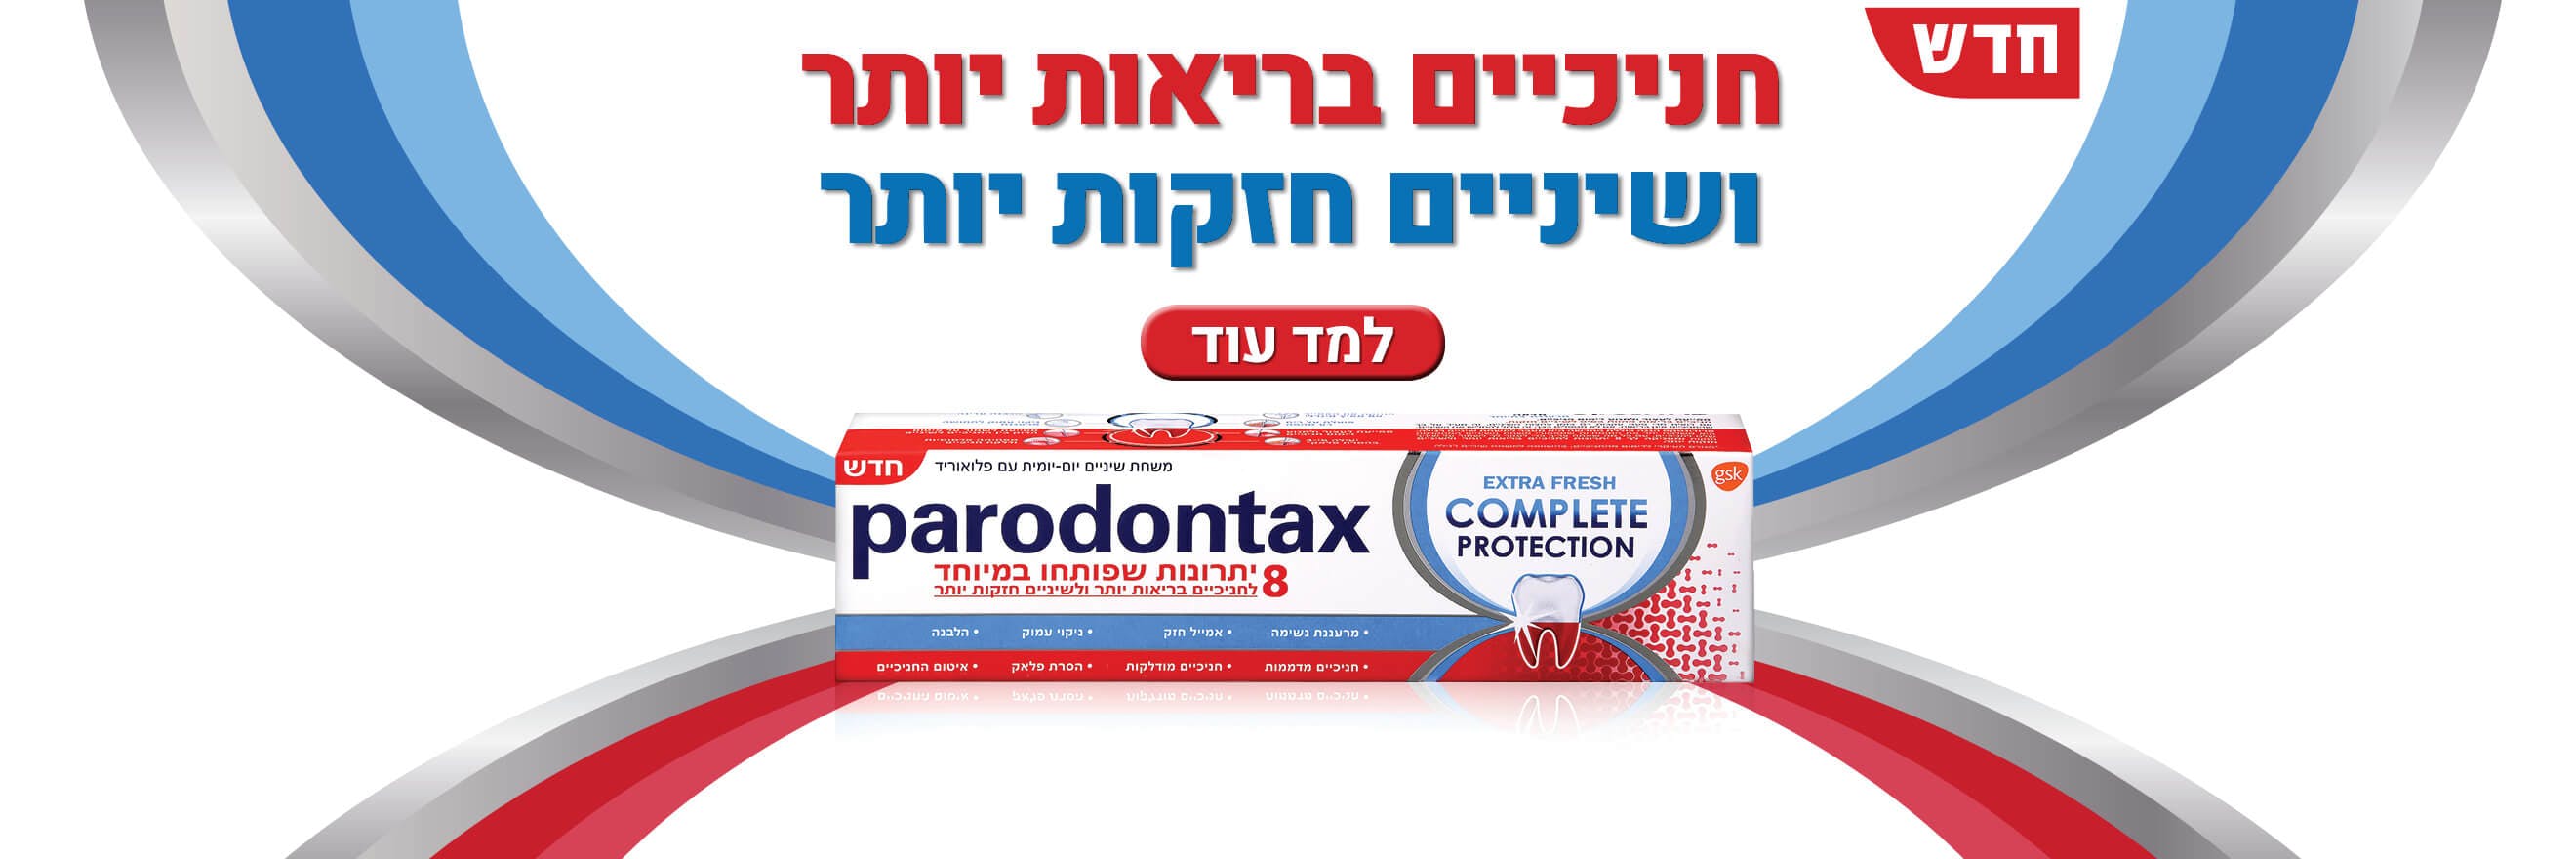 New parodontax Daily Ultra Clean toothpaste